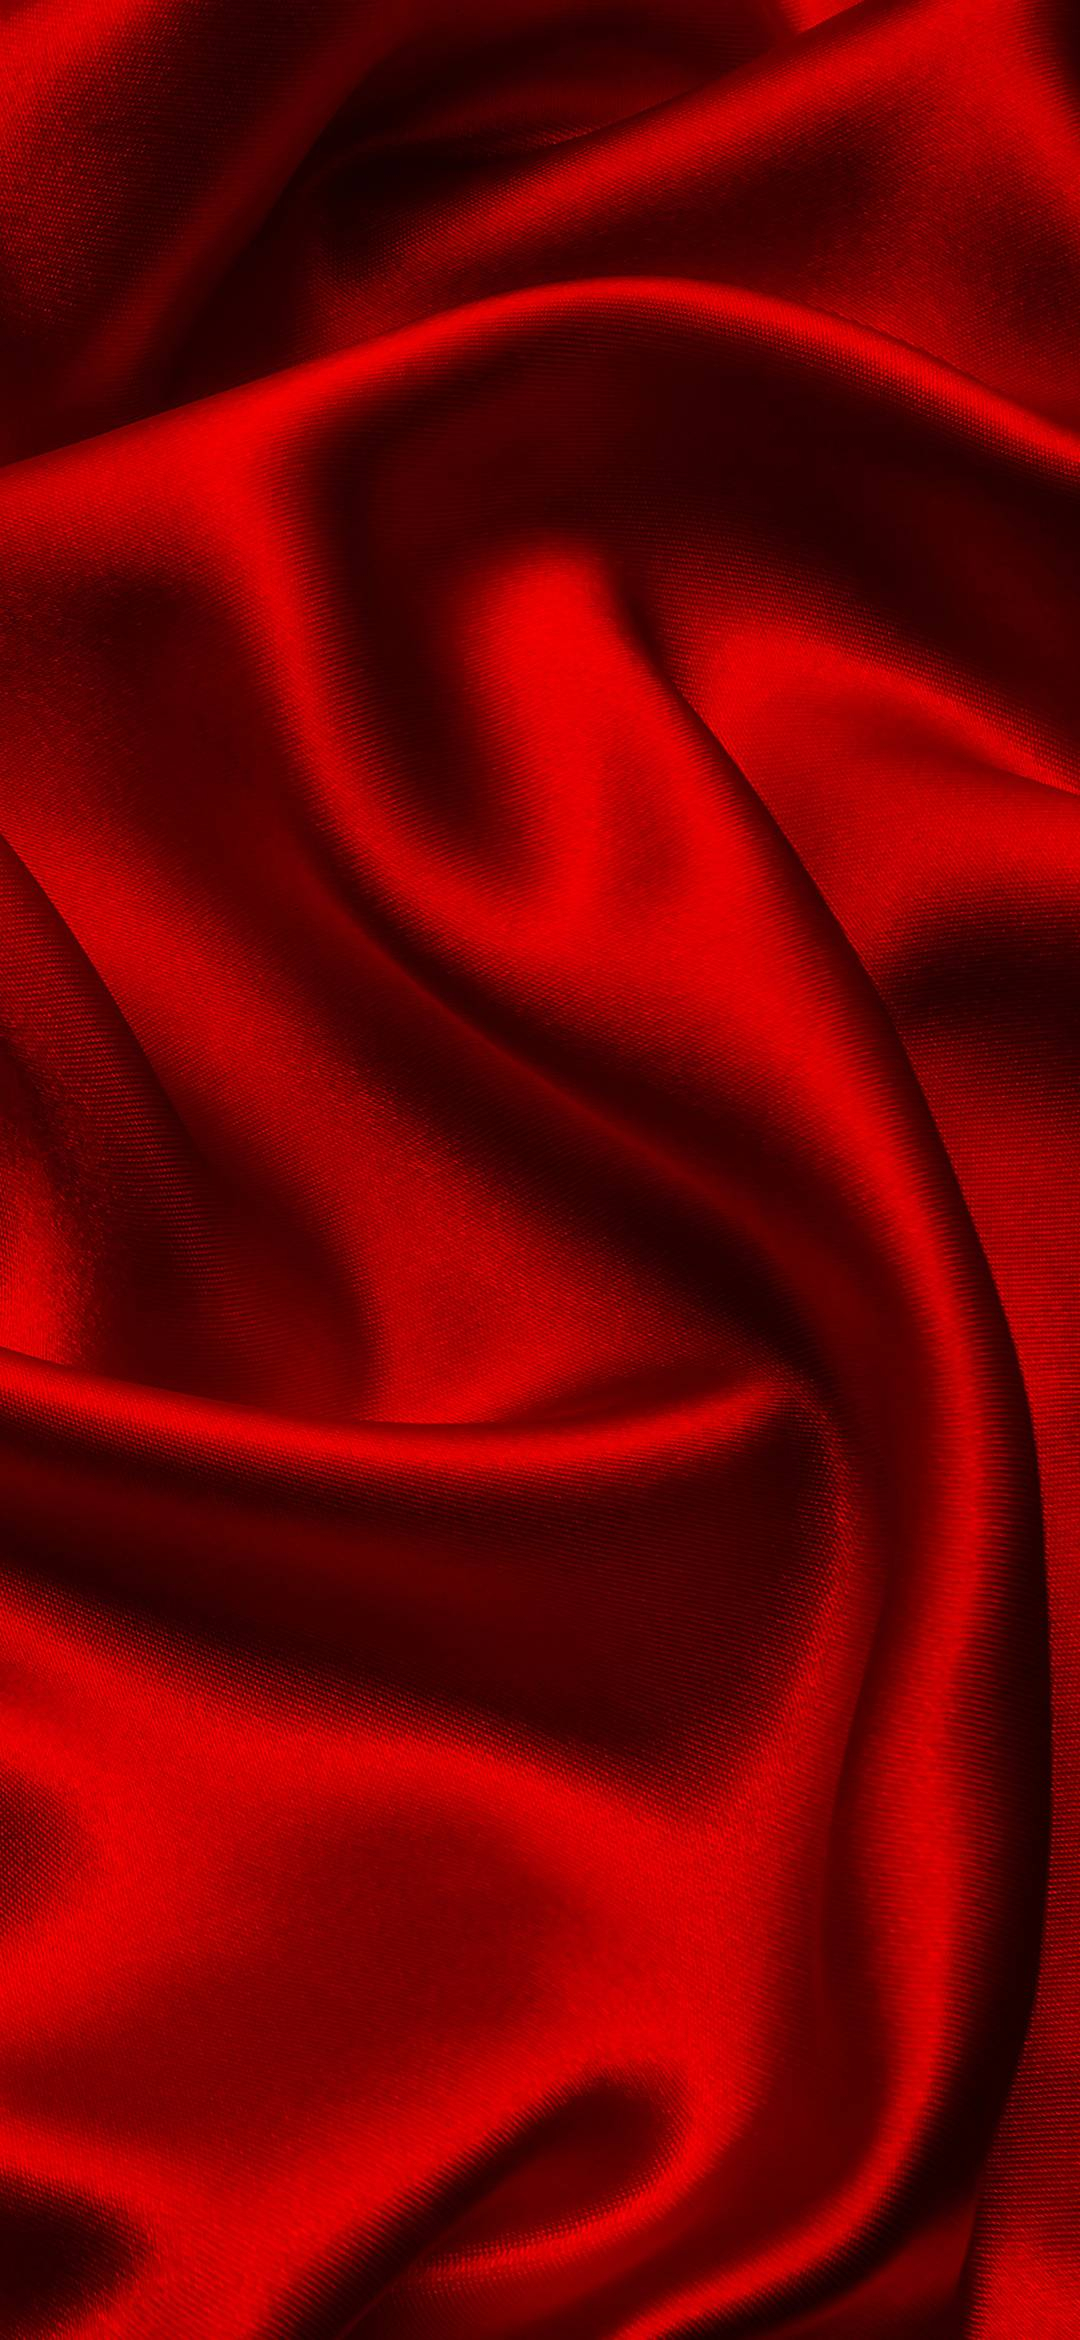 1080x2340 Red Background Wallpaper HD 70